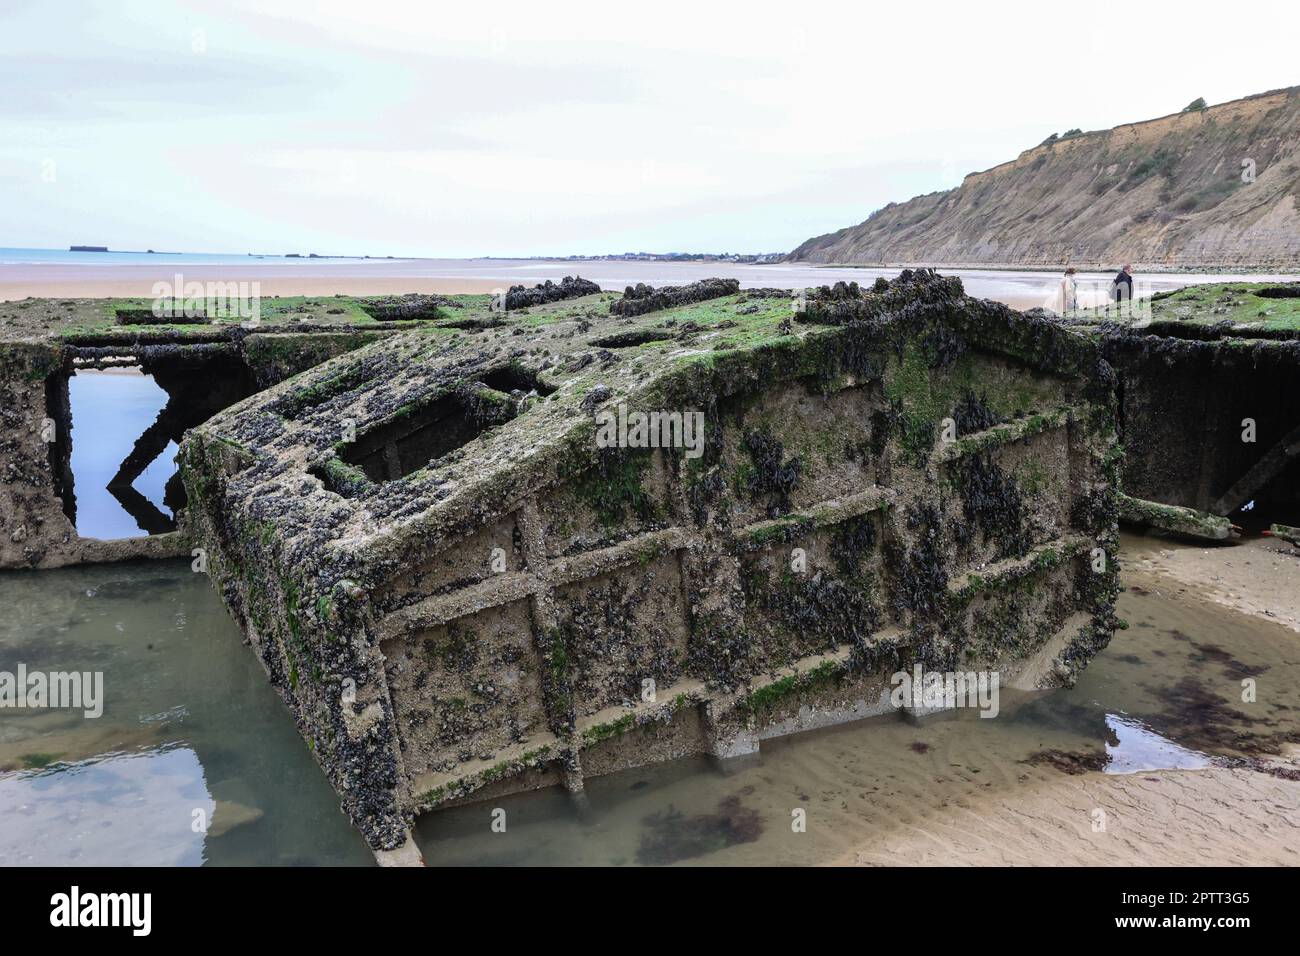 Operation Mulberry,Mulberry,artificial,portable,harbour,port,remains,from,WW II,Second World War,beach,at,Gold Beach,Arromanches,Arromanches-les-Bains,Normandy,Normandie,France,French,Europe,European in,Calvados,department,Normandy,Normandie,France,French,Europe,European, Stock Photo